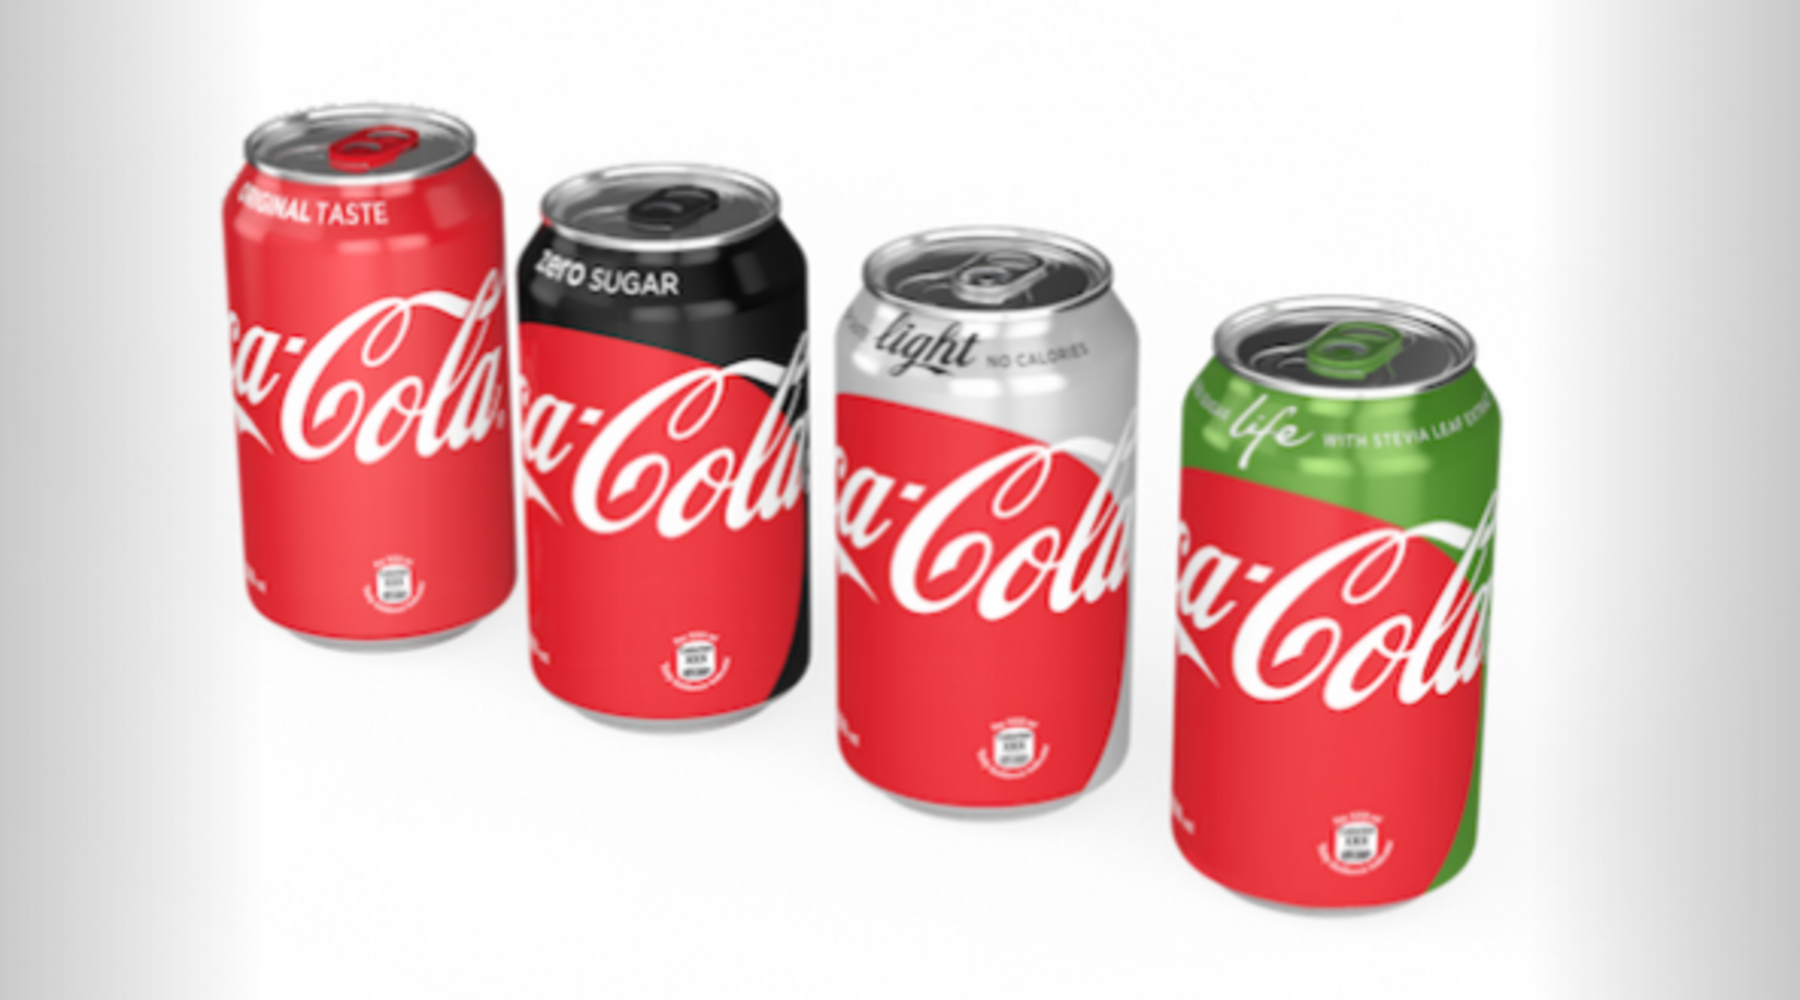 meditation Ring tilbage Brandmand Coca-Cola is changing its look - Marketplace